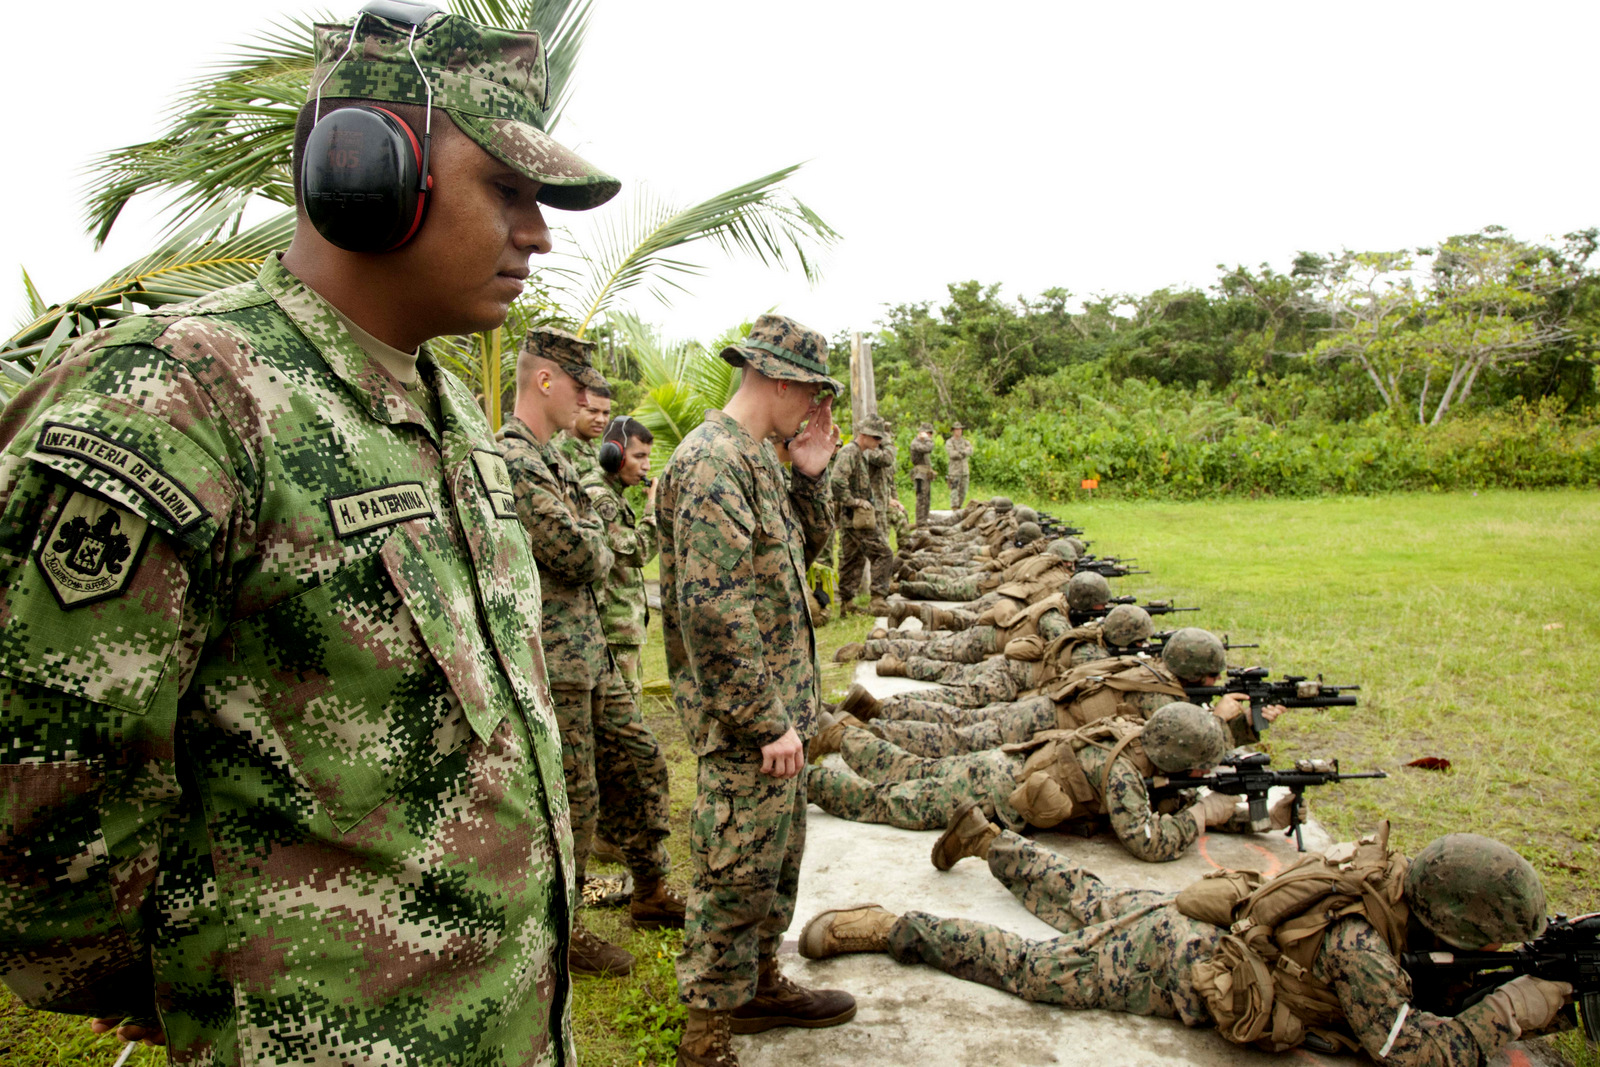 U.S. Marines with the Special Purpose Marine Air Ground Task Force (SPMAGTF) conduct advanced marksmanship training with Colombian marines in Matuntugo, Colombia, Nov. 7, 2011. (U.S. Army Photo)